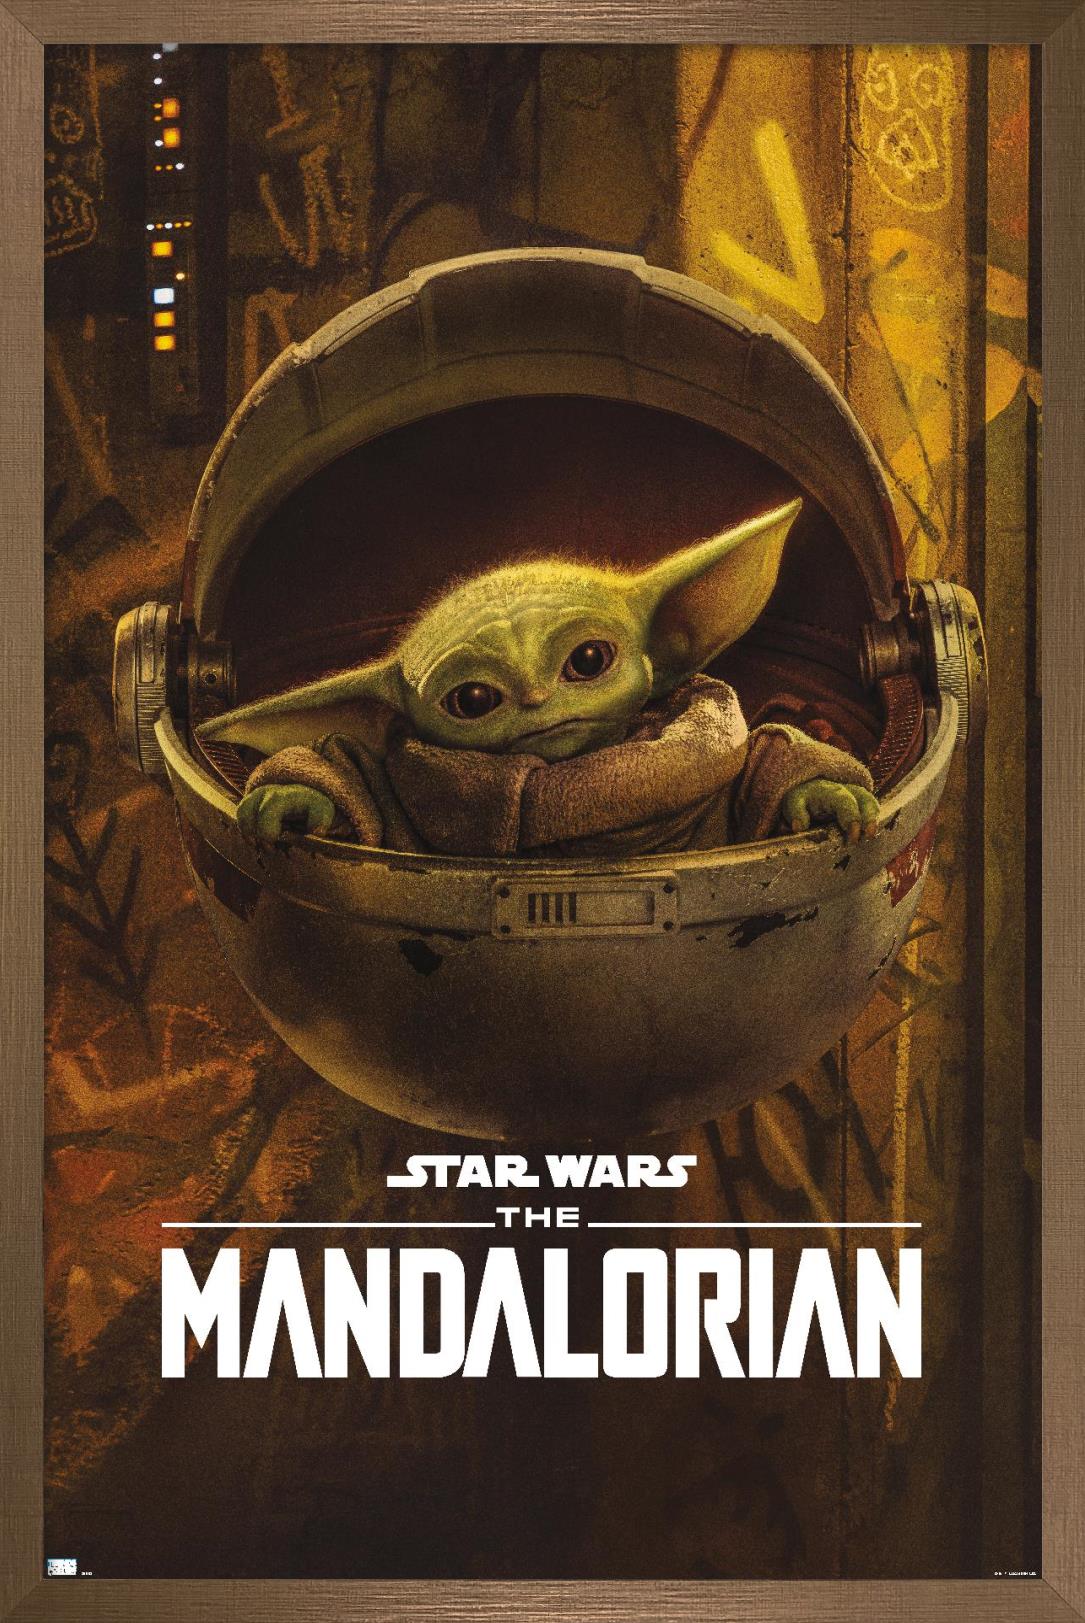 Star Wars: The Mandalorian Season 2 - The Child Wall Poster, 22.375" x 34", Framed - image 1 of 5